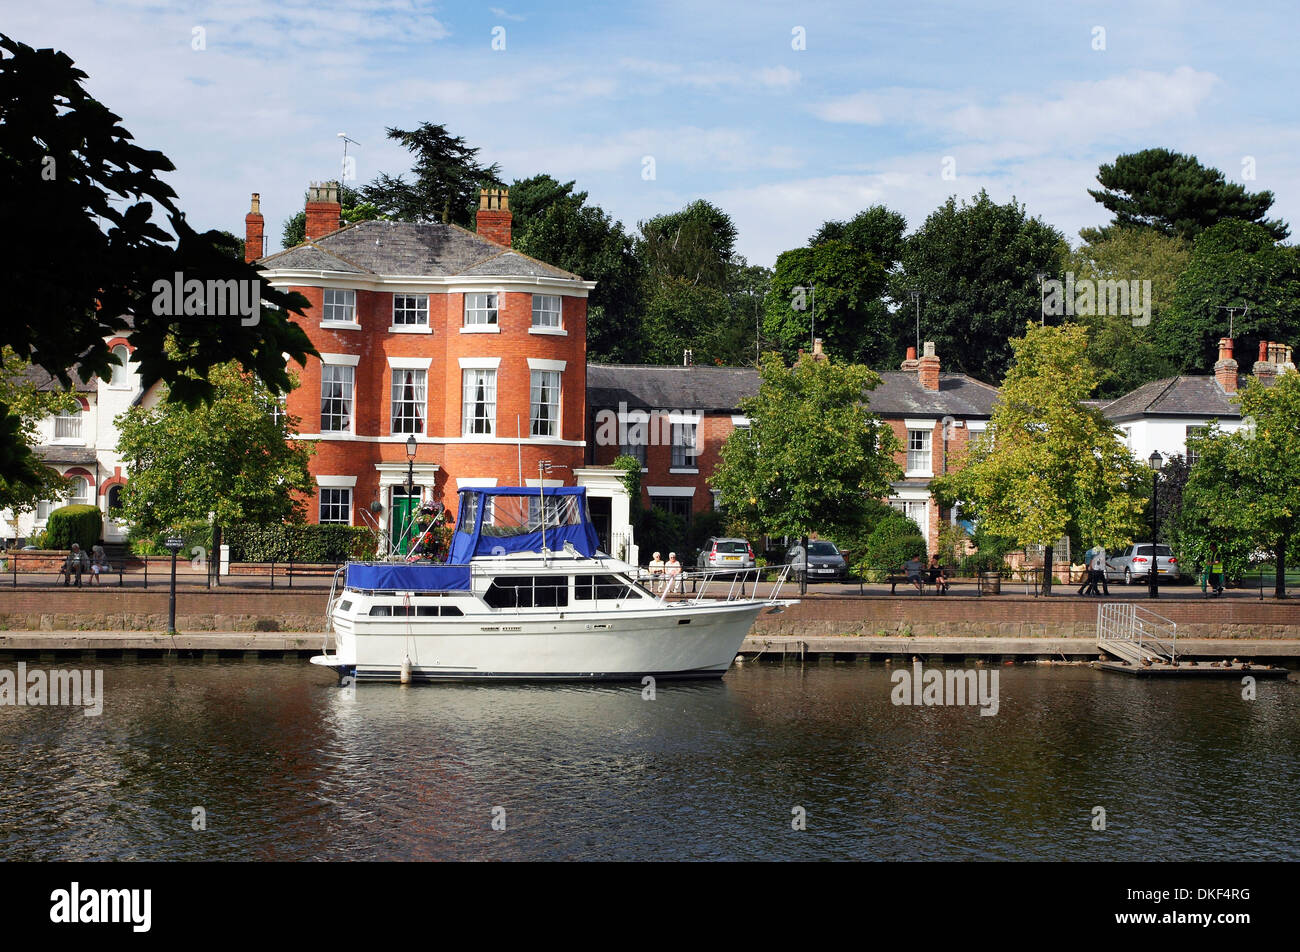 The River Dee at Chester, showing private boats moored at riverside moorings, and riverside houses. Stock Photo